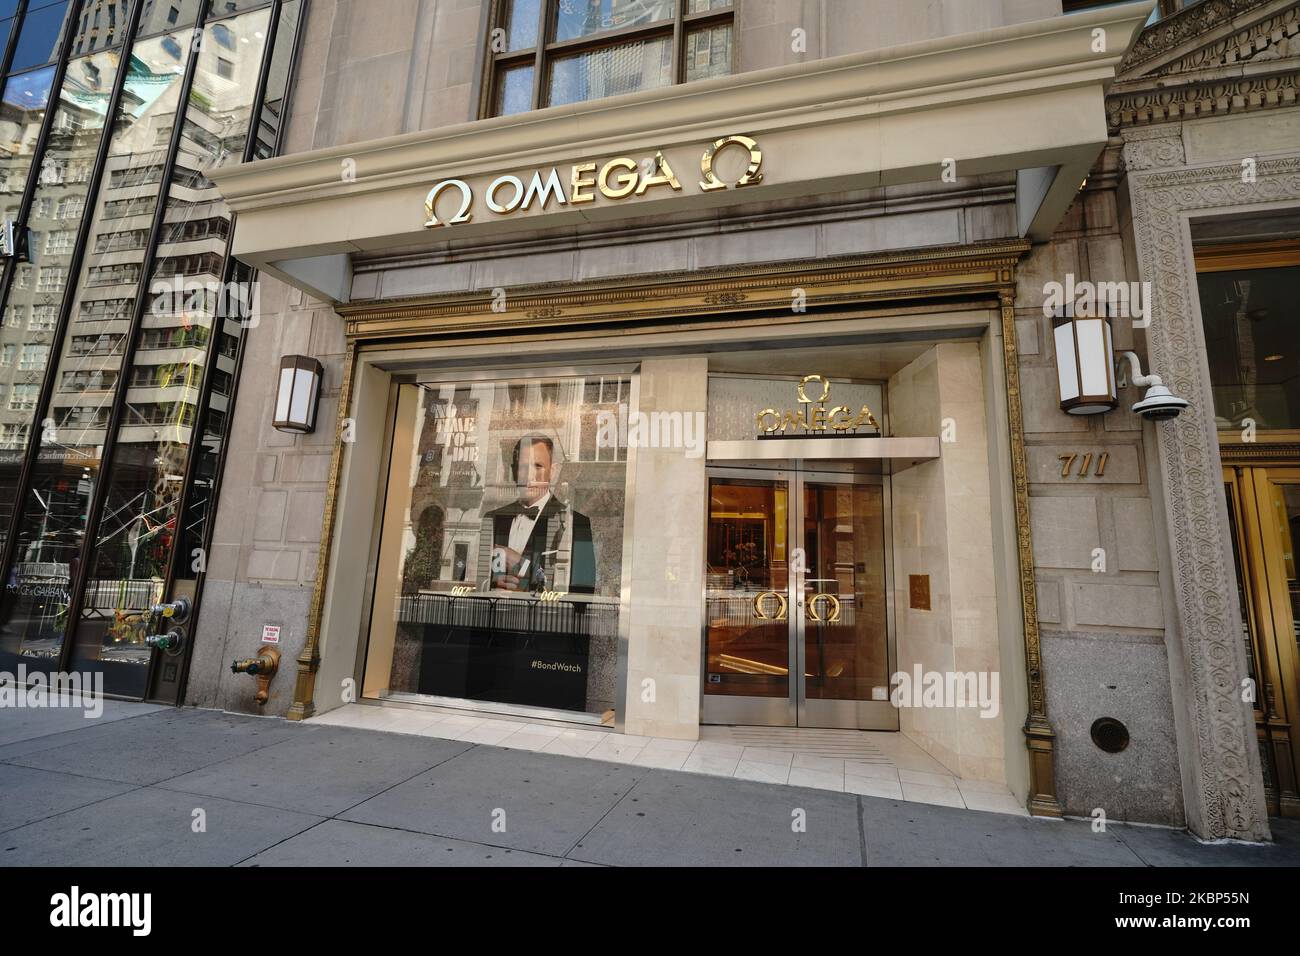 A view of Omega Boutique during the coronavirus pandemic on May 20, 2020 in 5th Ave., New York City. COVID-19 has spread to most countries around the world, claiming over 316,000 lives with over 4.8 million infections reported. (Photo by John Nacion/NurPhoto) Stock Photo